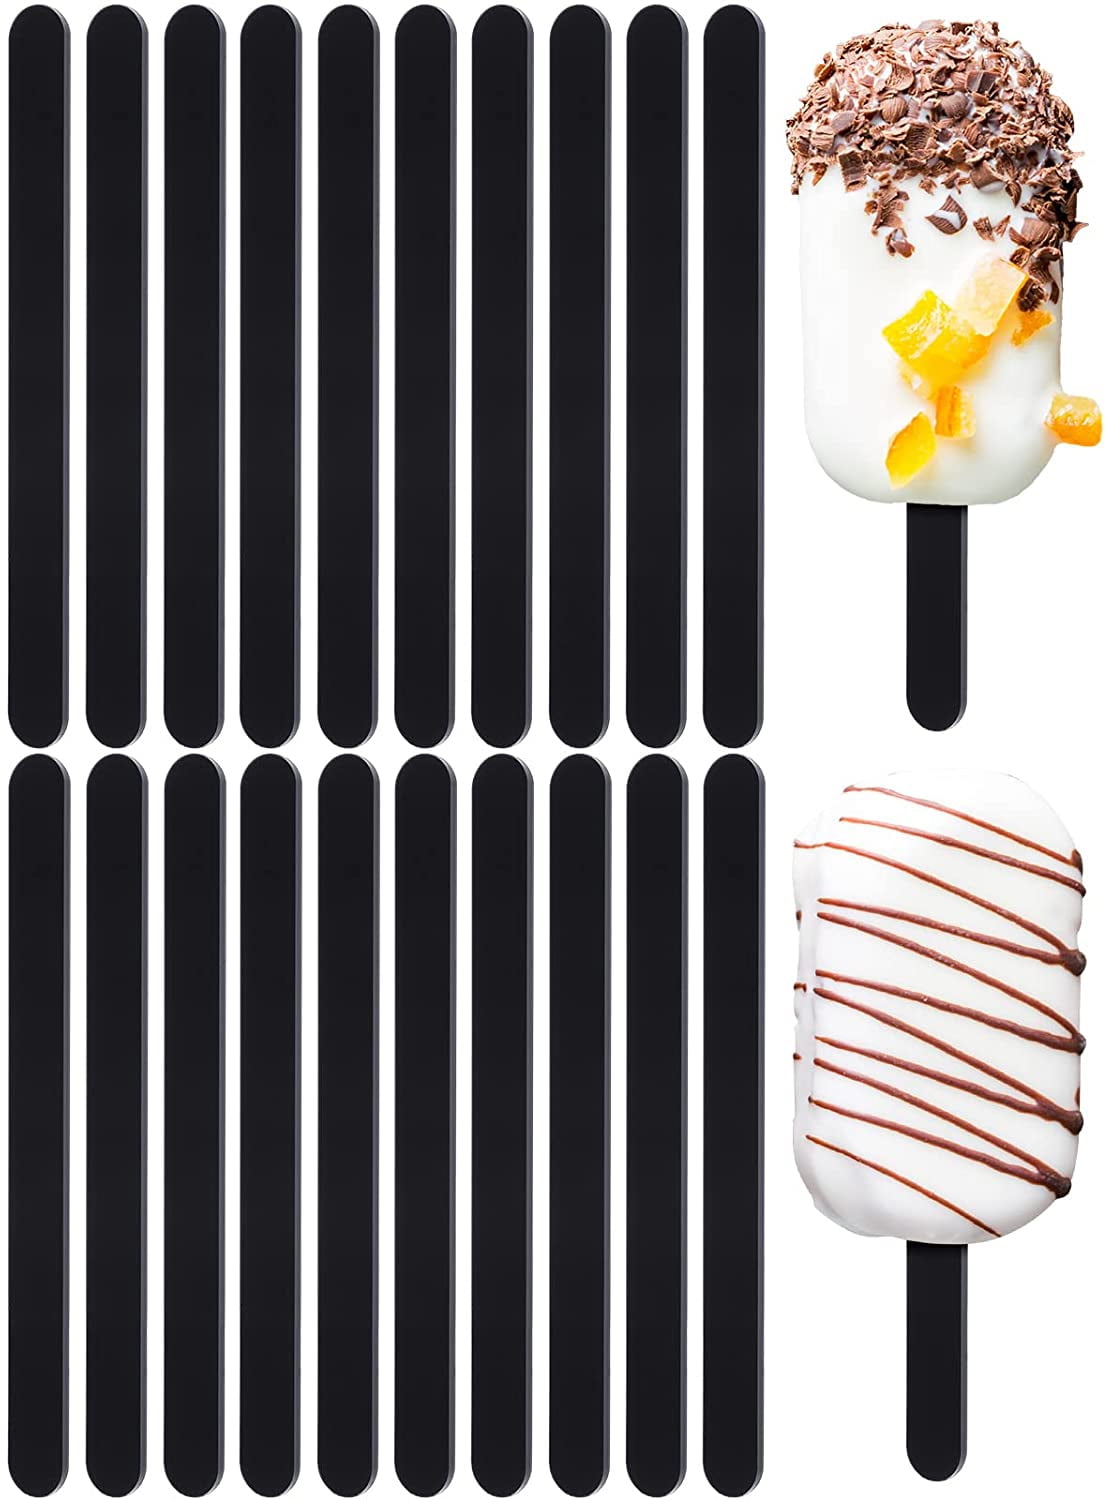 NOGIS Reusable Acrylic Sticks for Ice Cream, Popsicle, Colored Smooth  IceTreat Sticks for DIY Handcraft Model, Ice Cream Sticks(20pc Black)